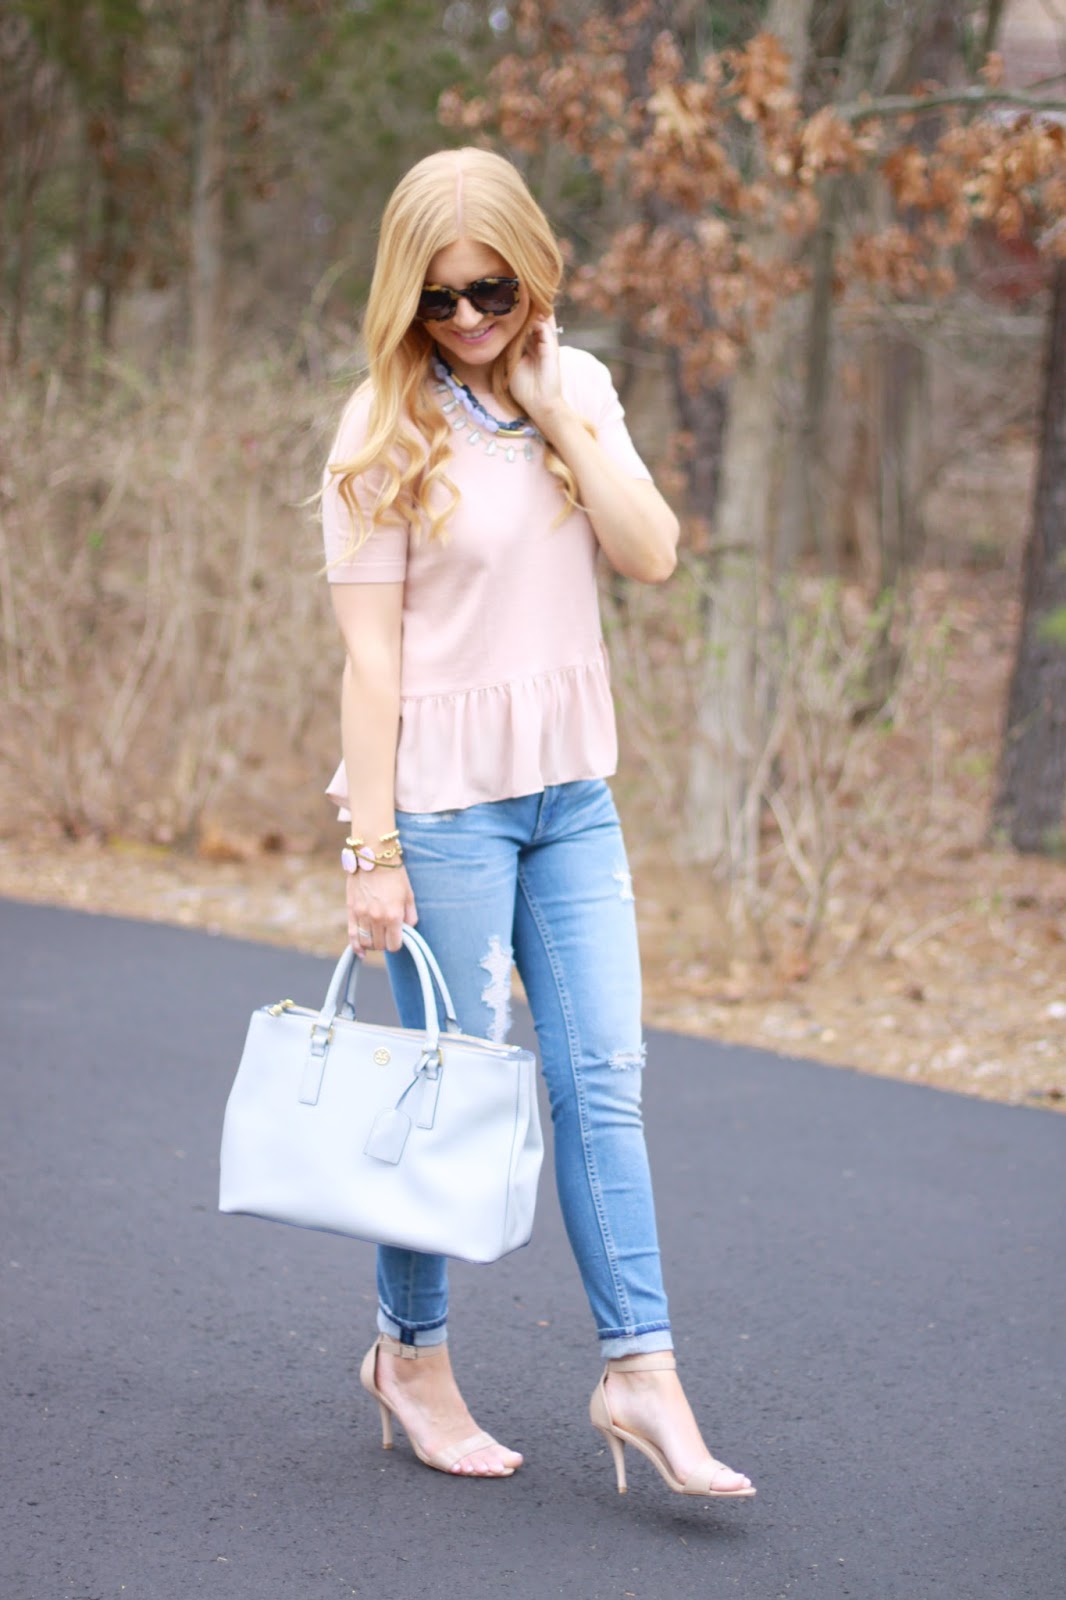 Shopping Bags and Travel Bags: Ruffle Sweater